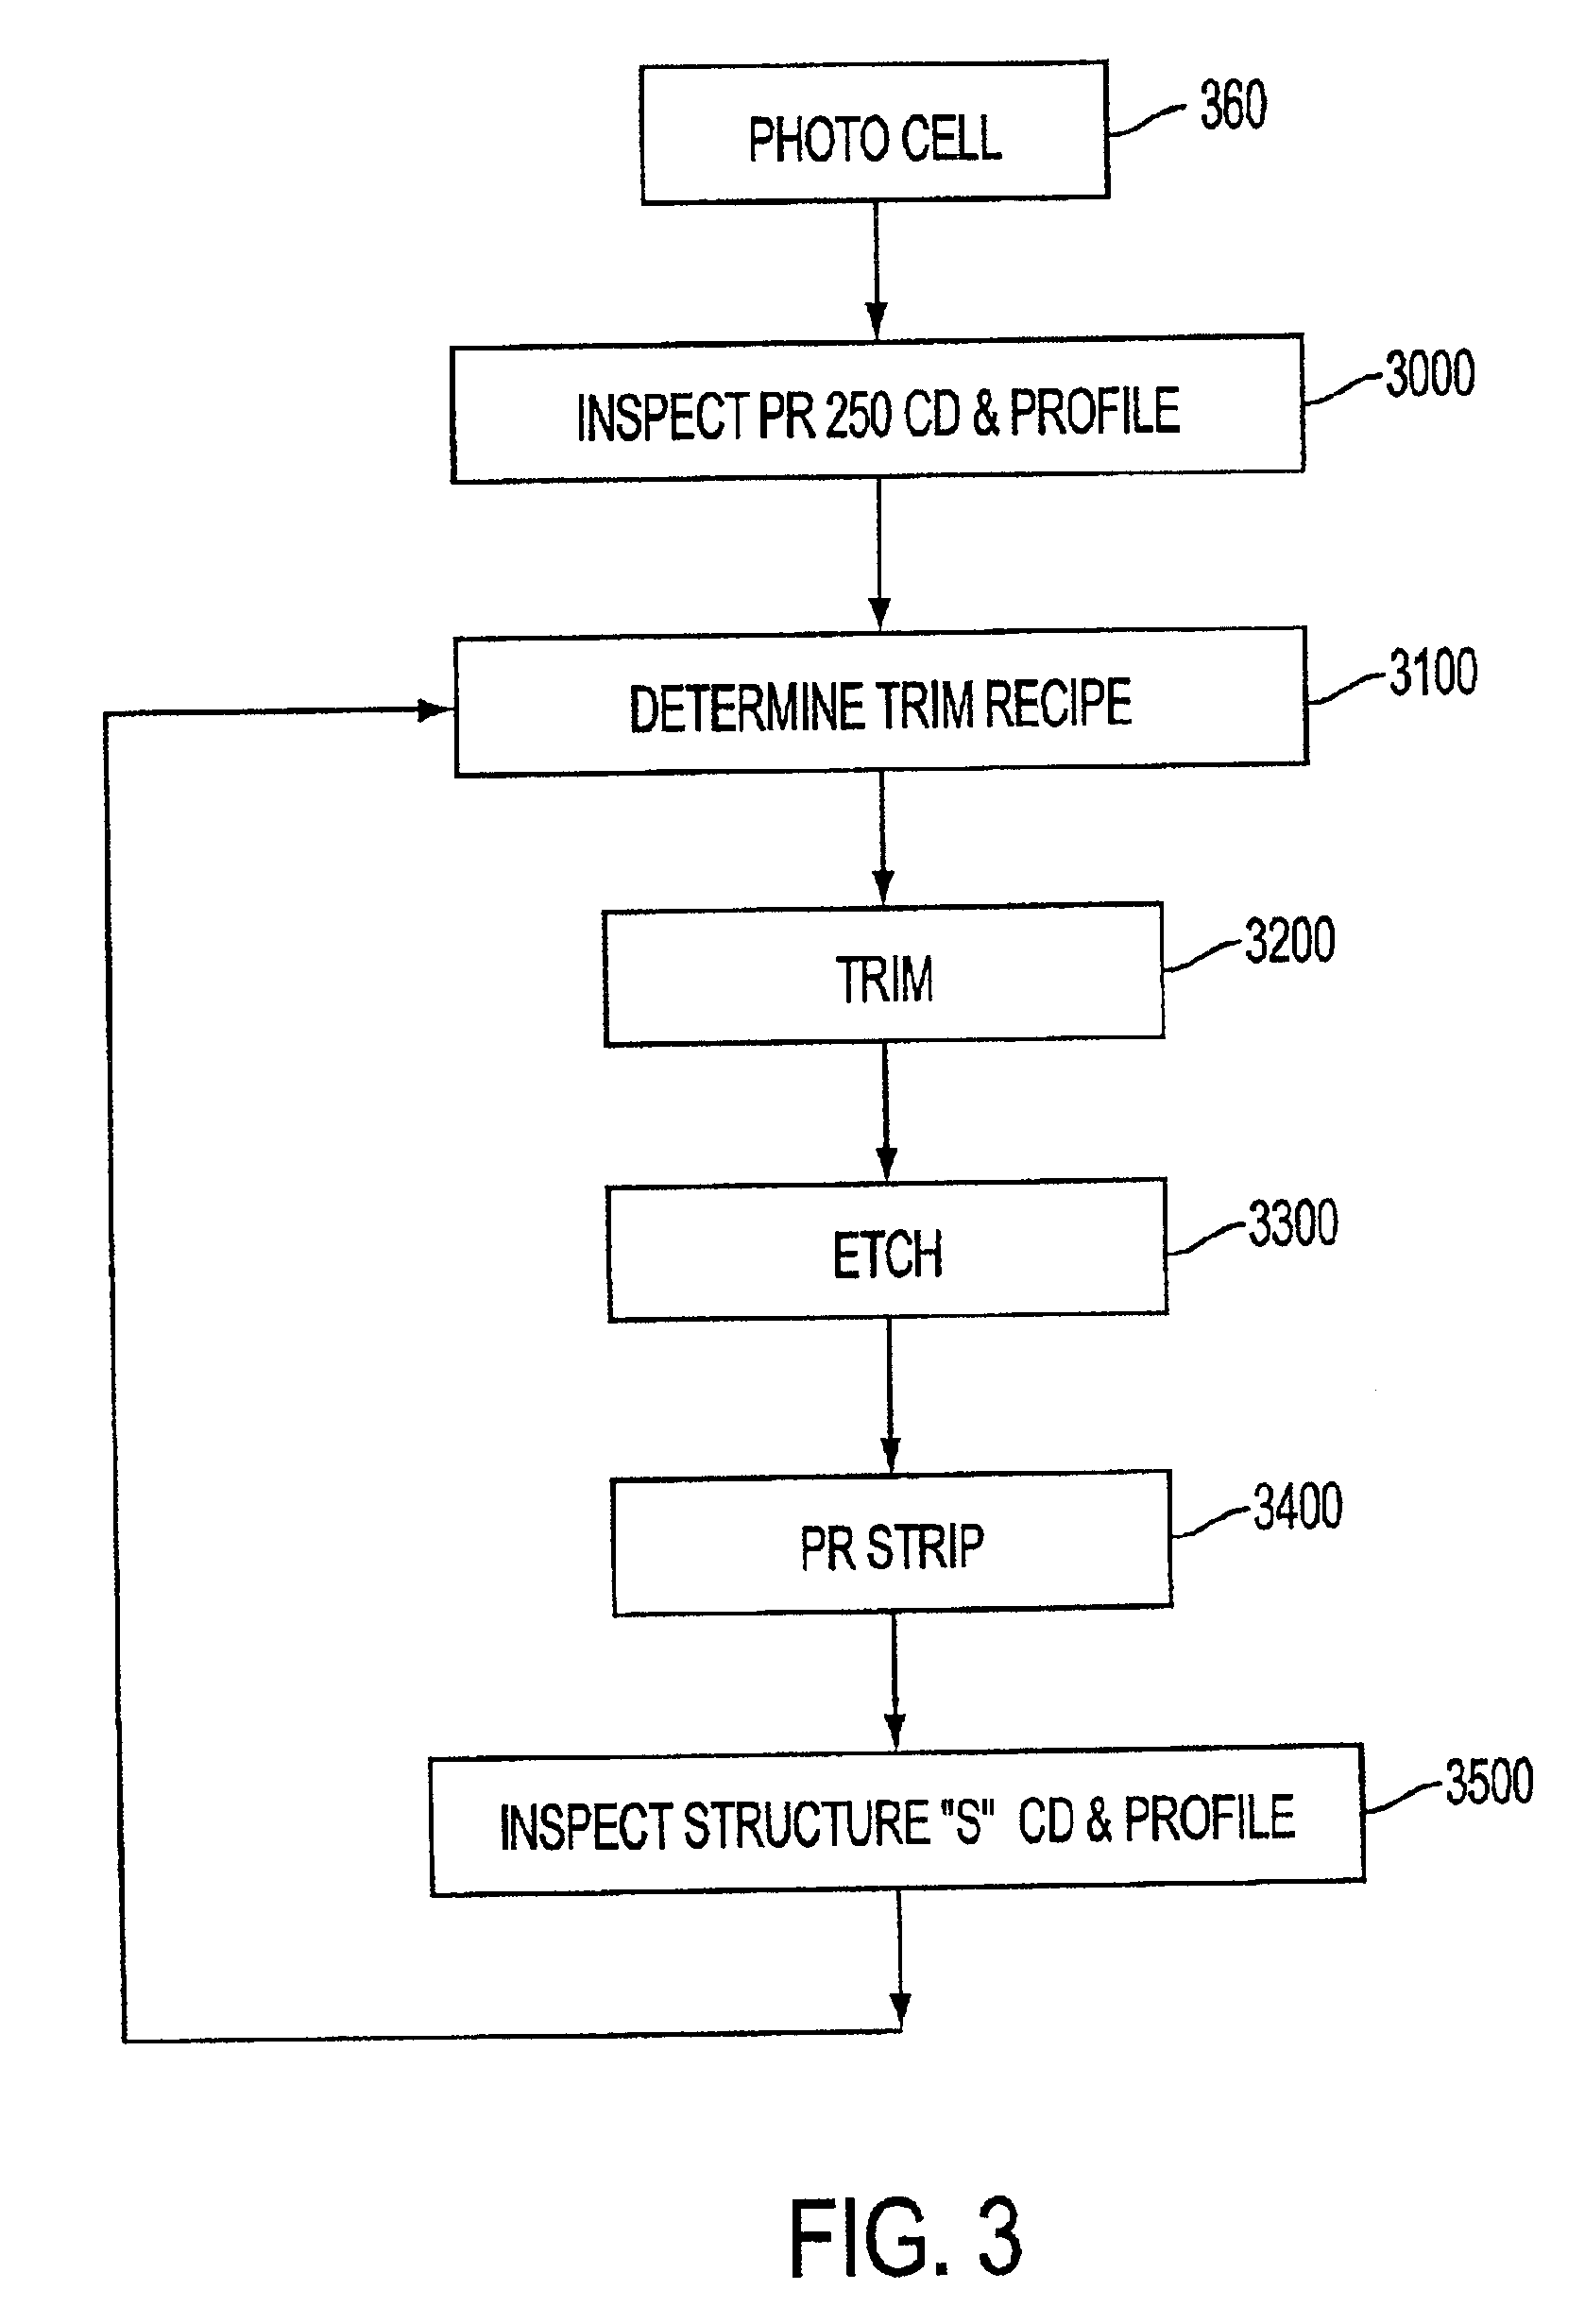 Methodology for repeatable post etch CD in a production tool